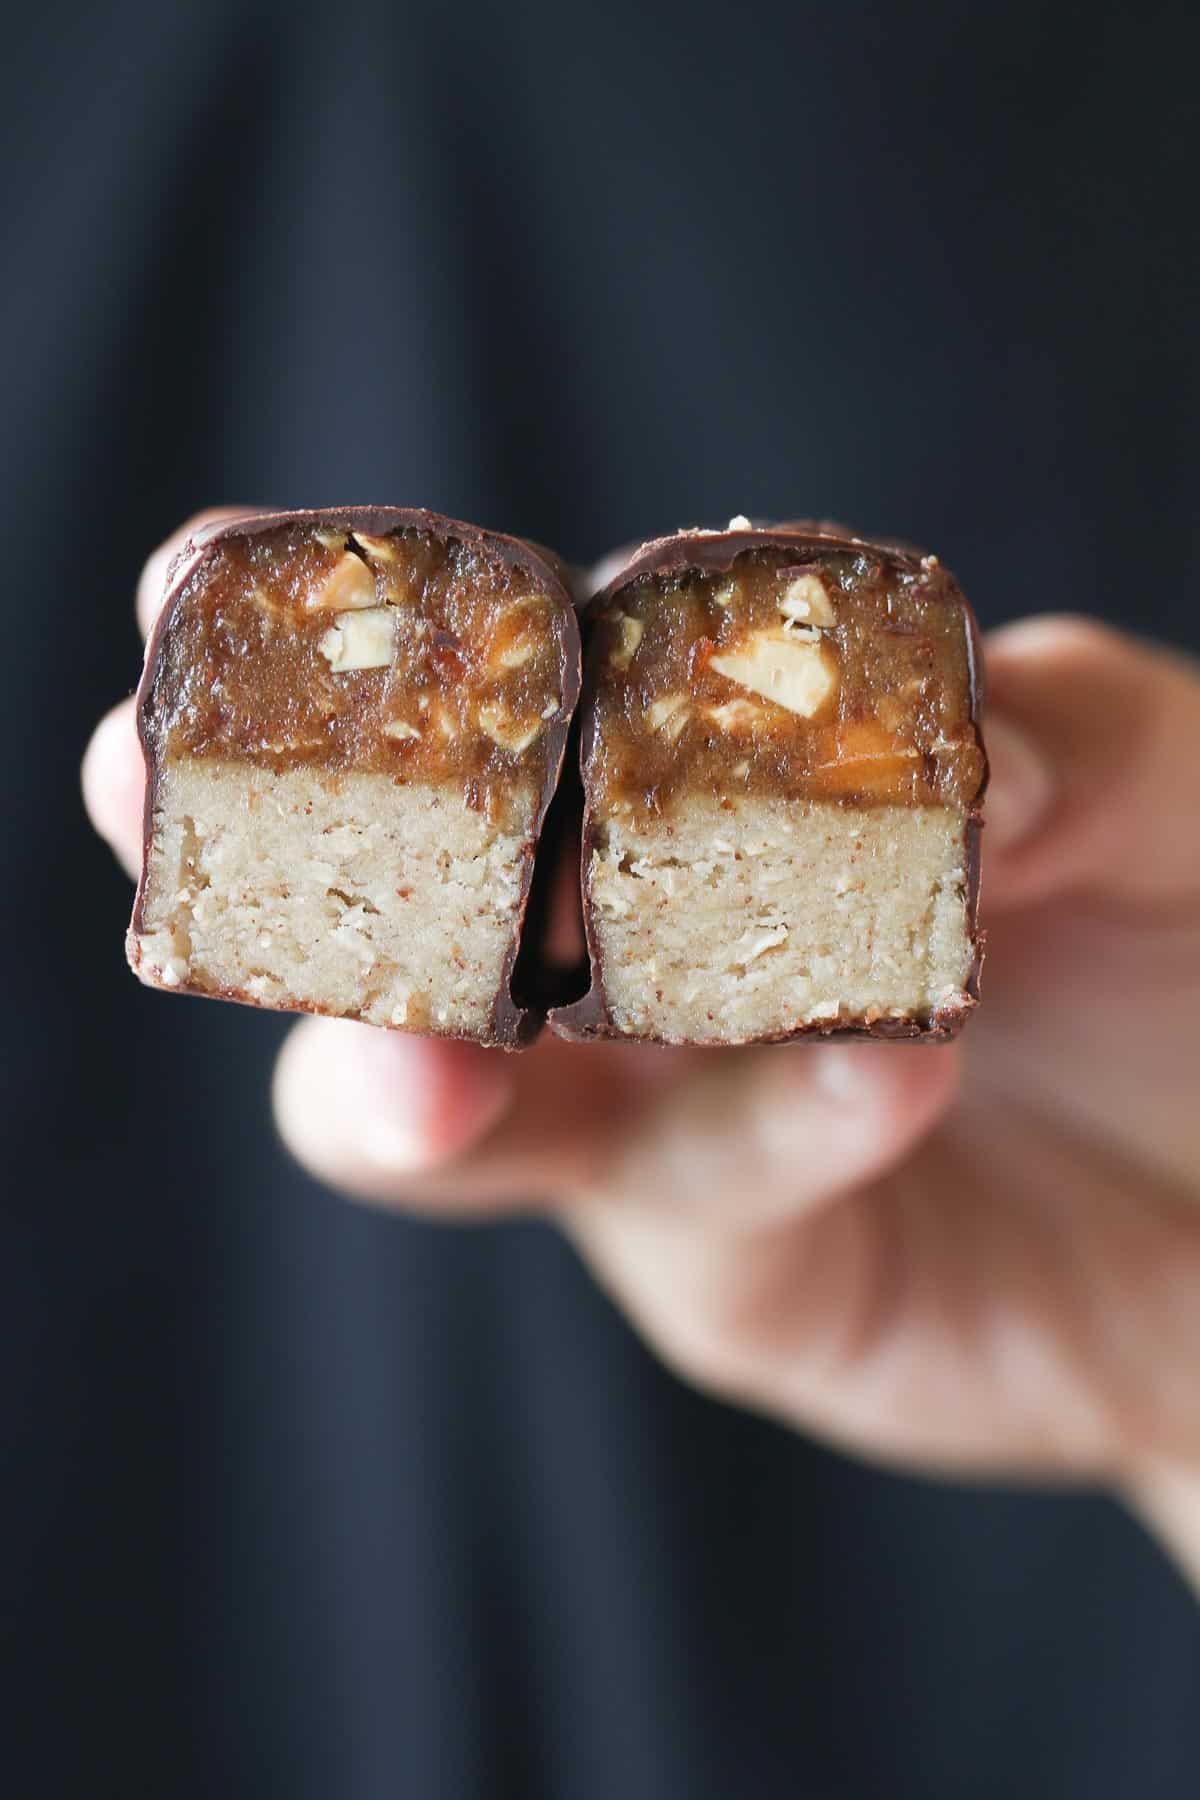 Hand showing the cross section of a homemade snickers bar